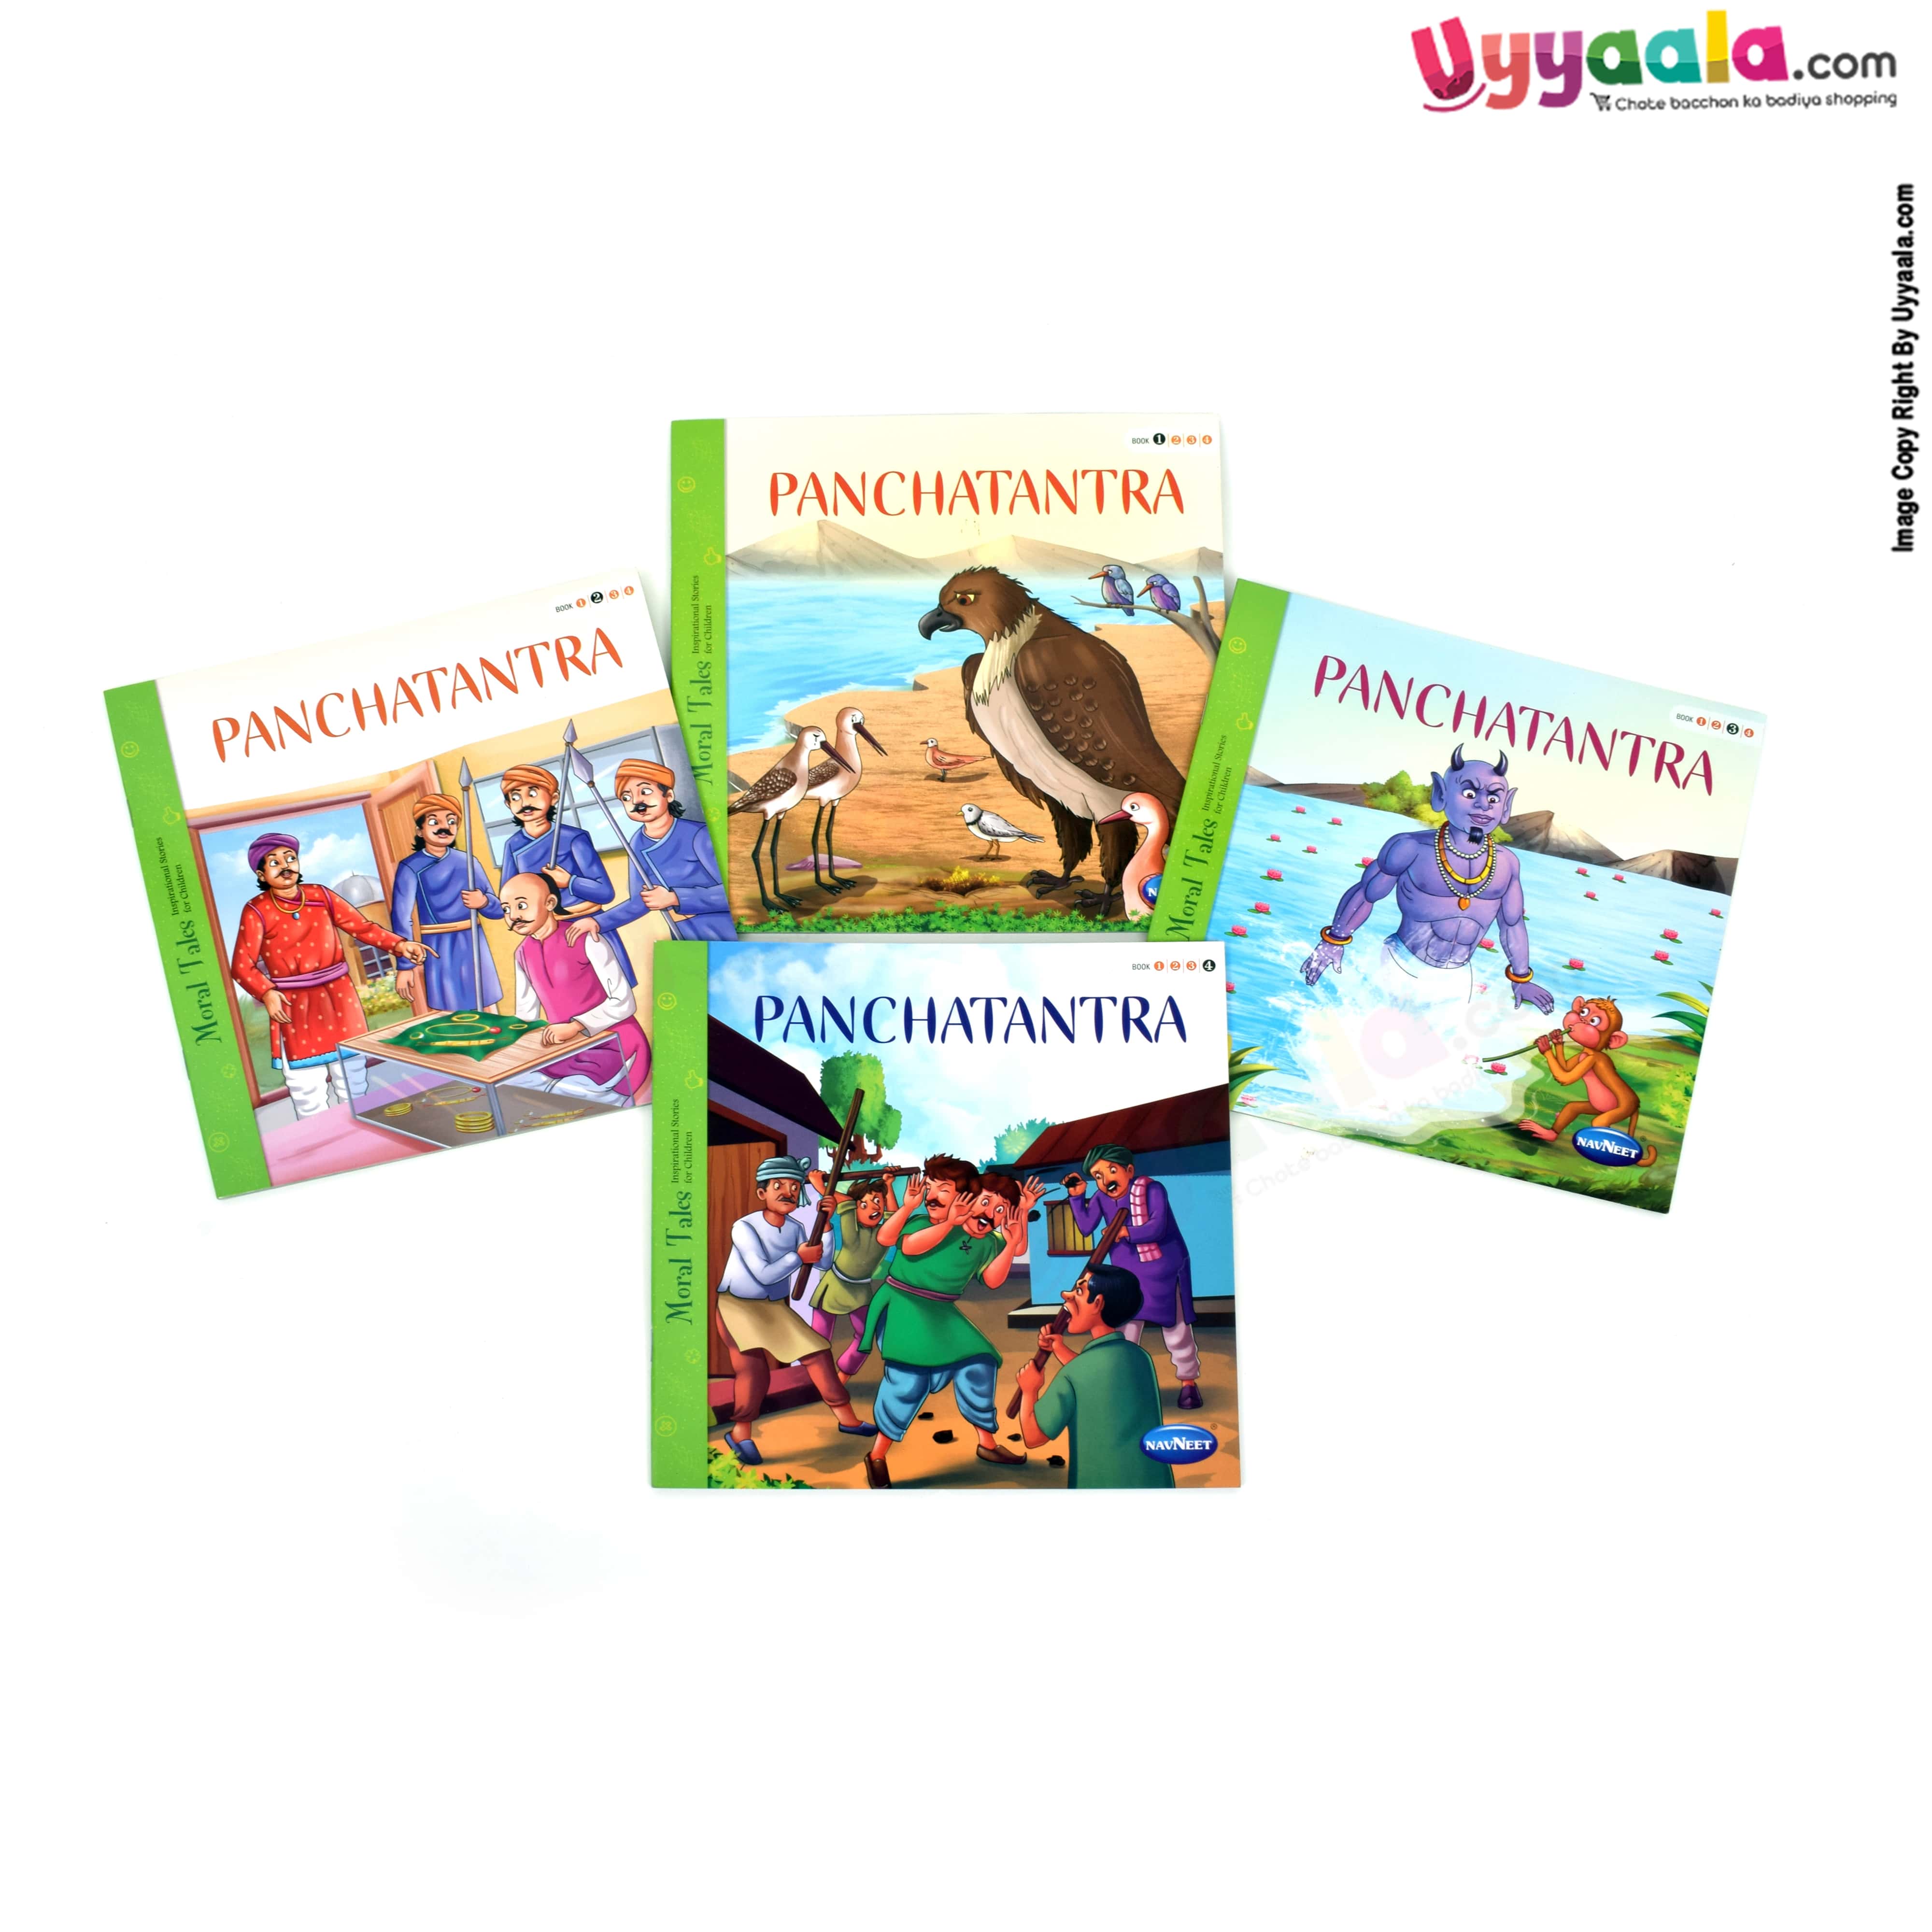 NAVNEET moral tales inspirational stories for children, panchatantra Pack of 4 - 4 volumes